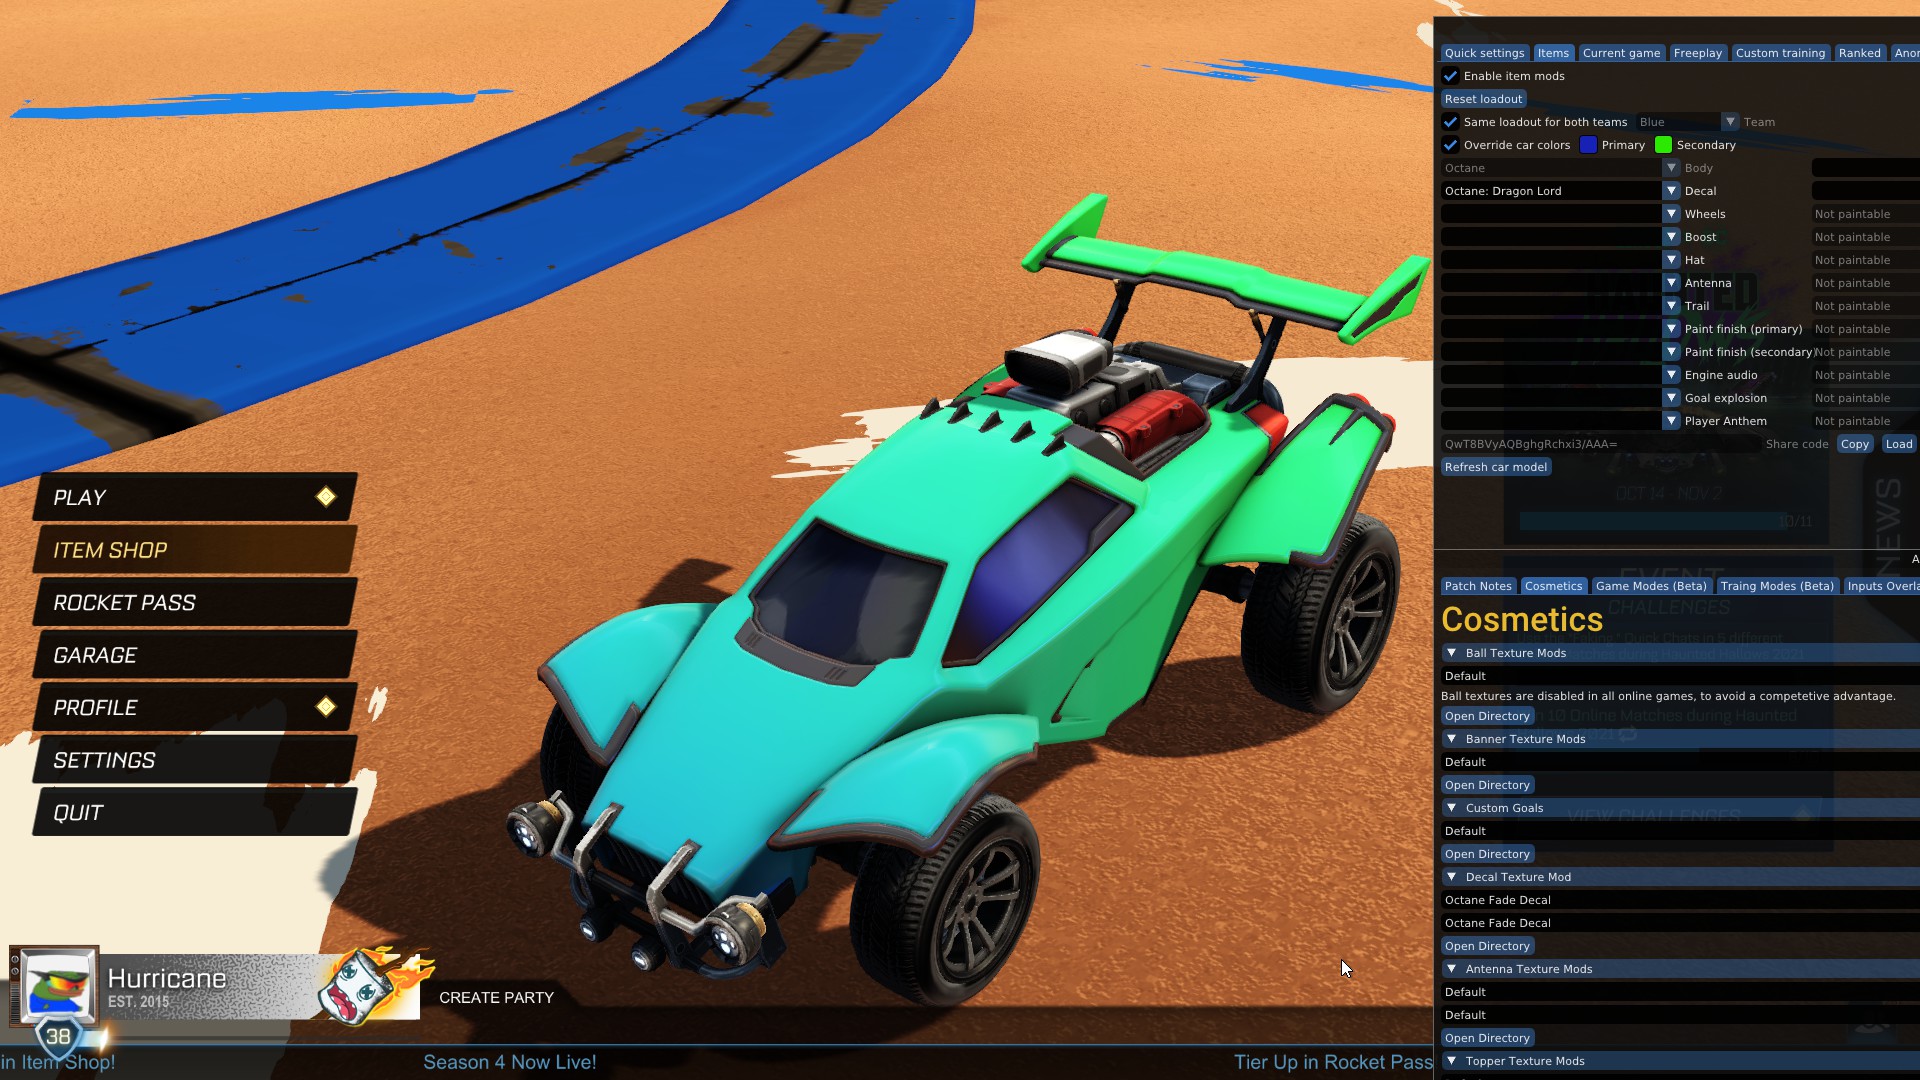 octane fade color decal (repl dragonlord)